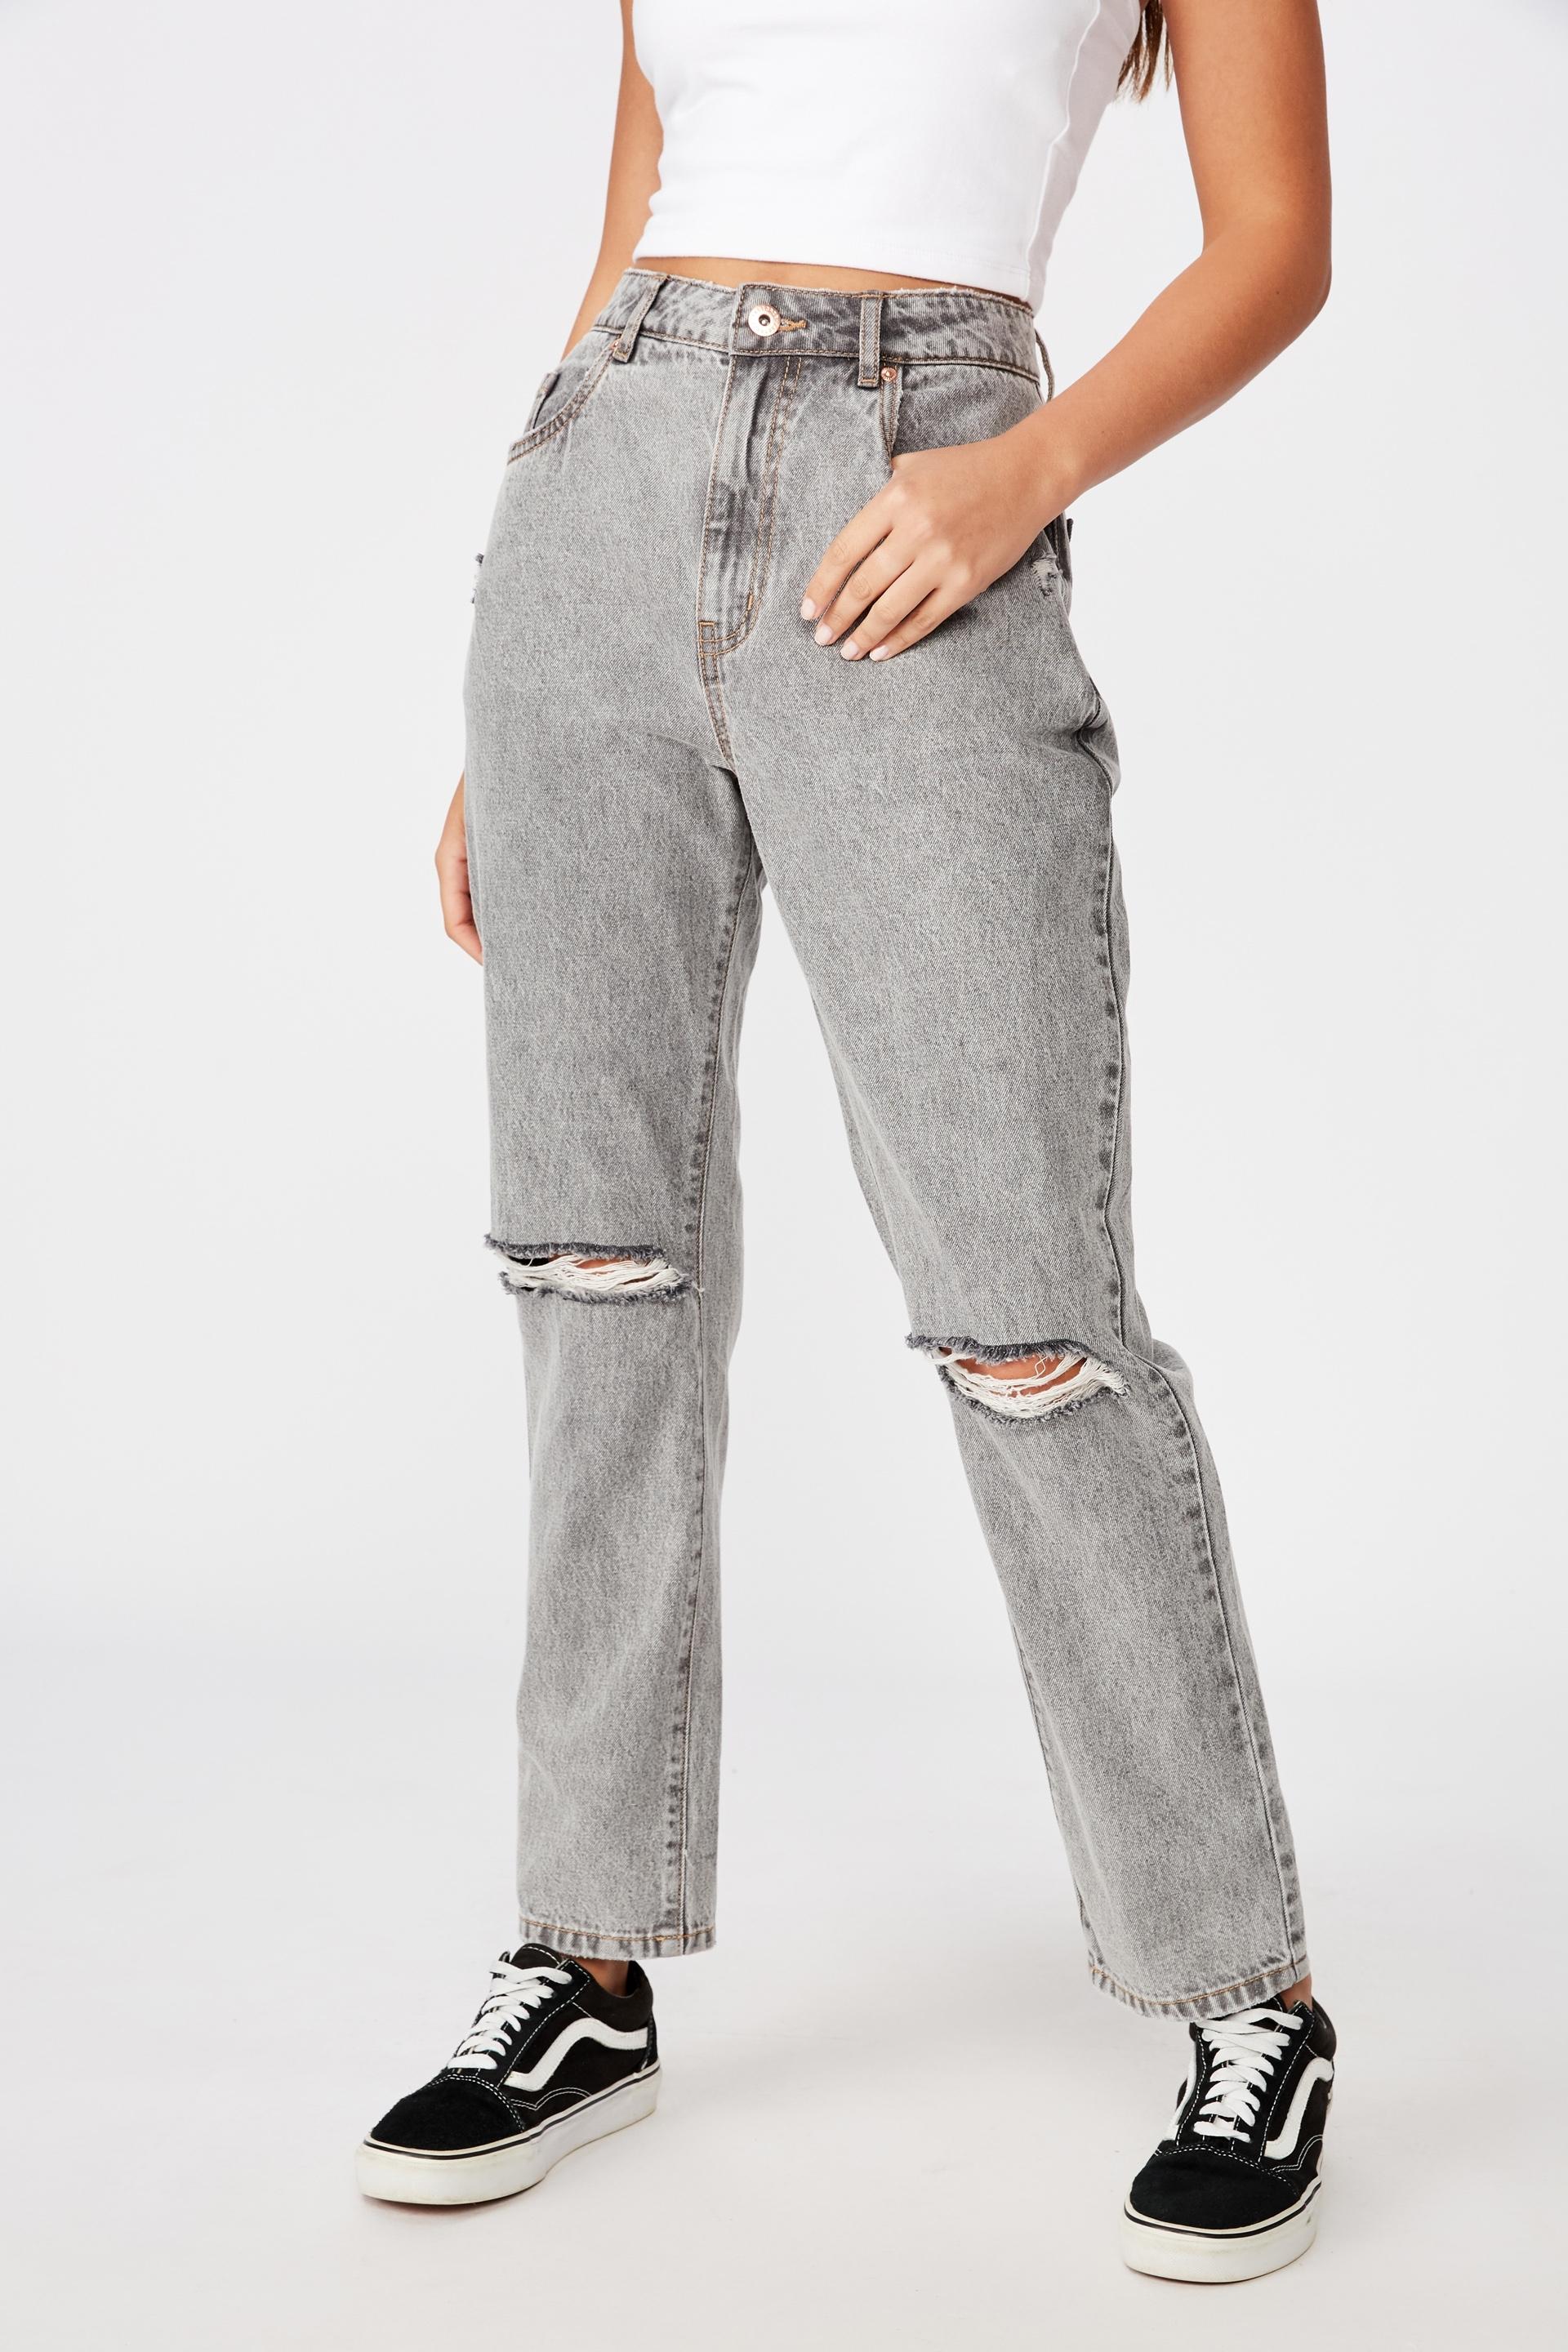 grey ripped mom jeans